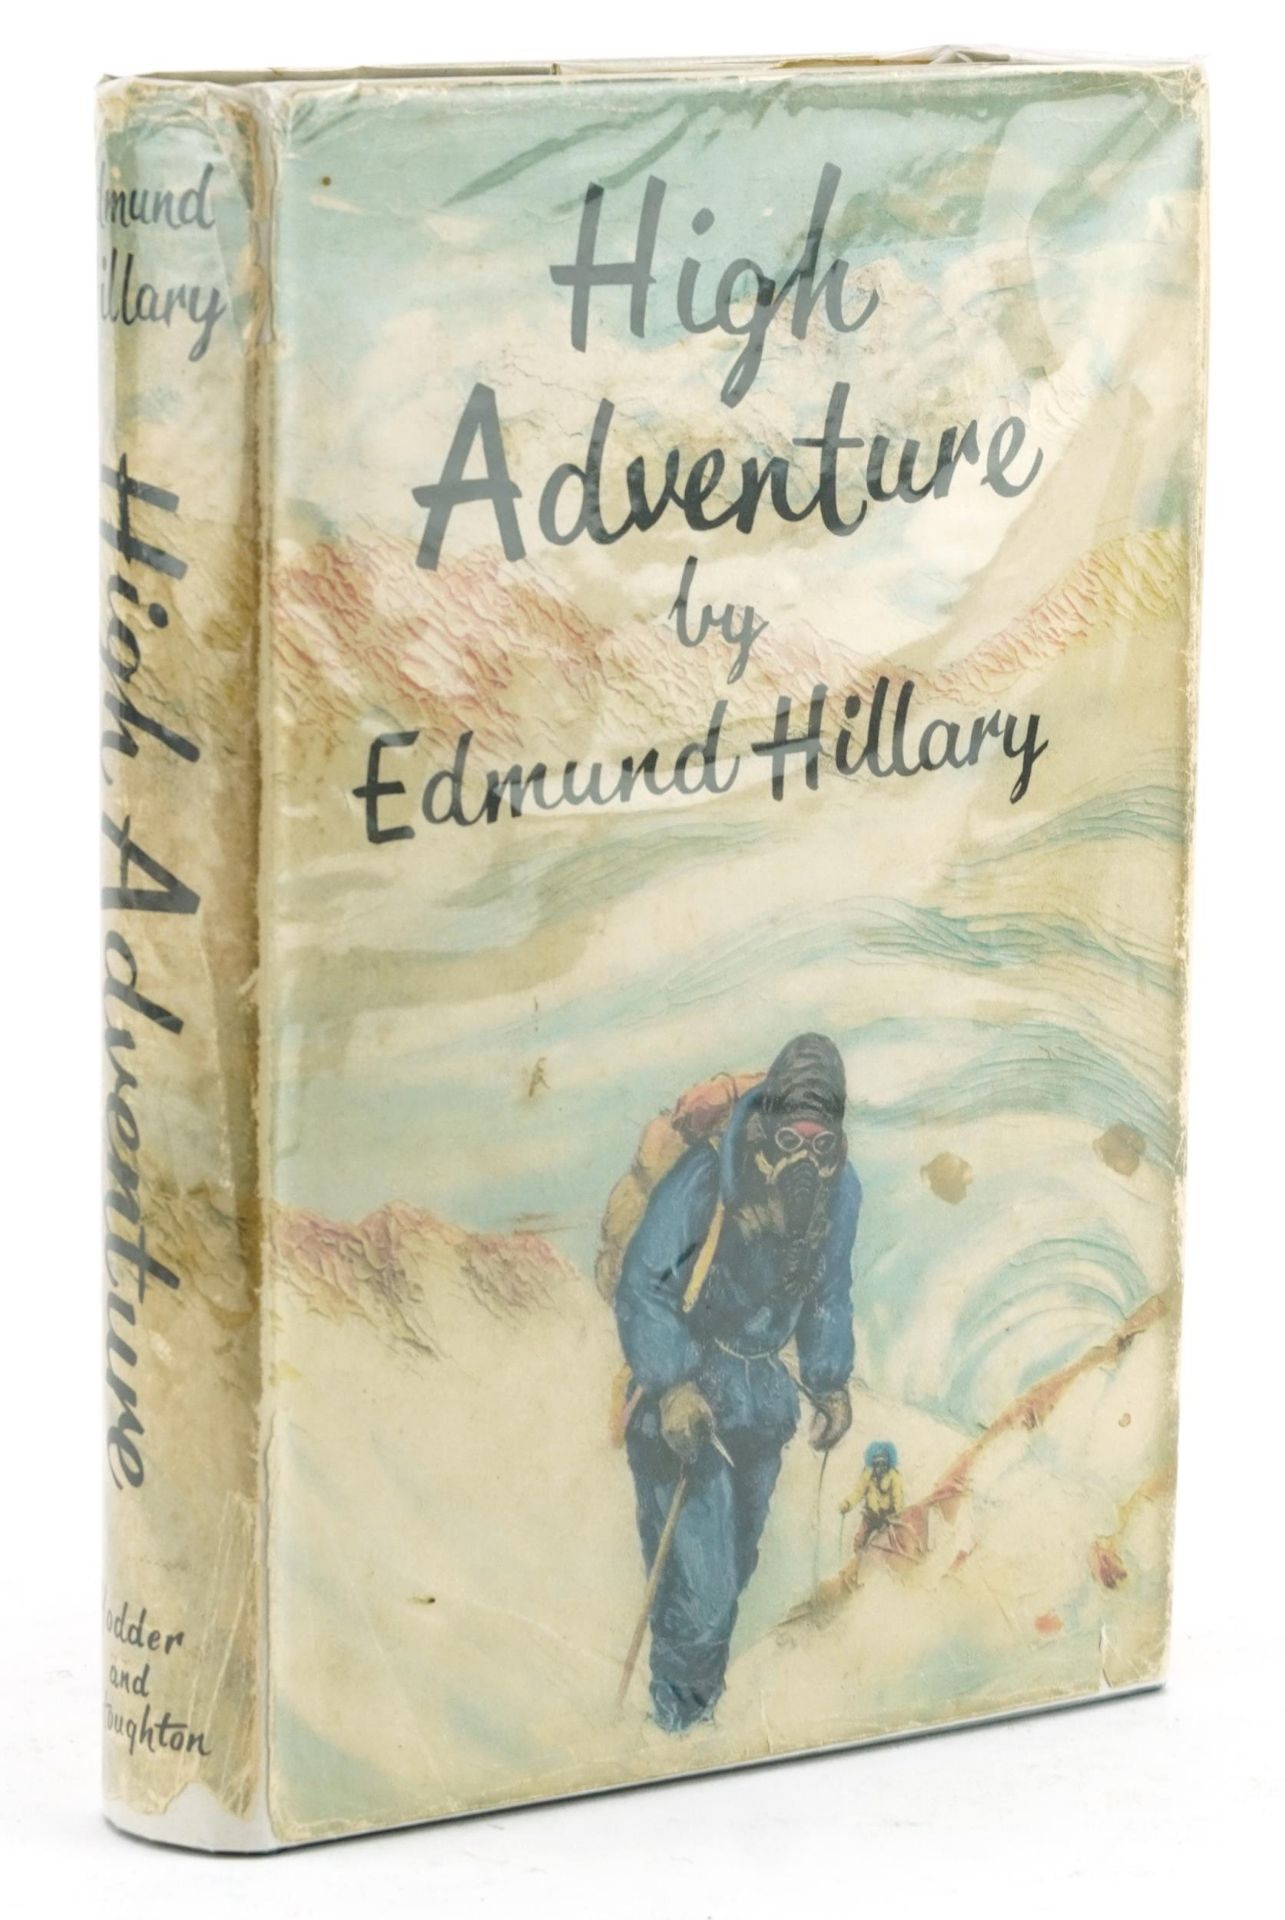 High Adventure, hardback book with dust jacket by Edmund Hillary, first published 1955 : For further